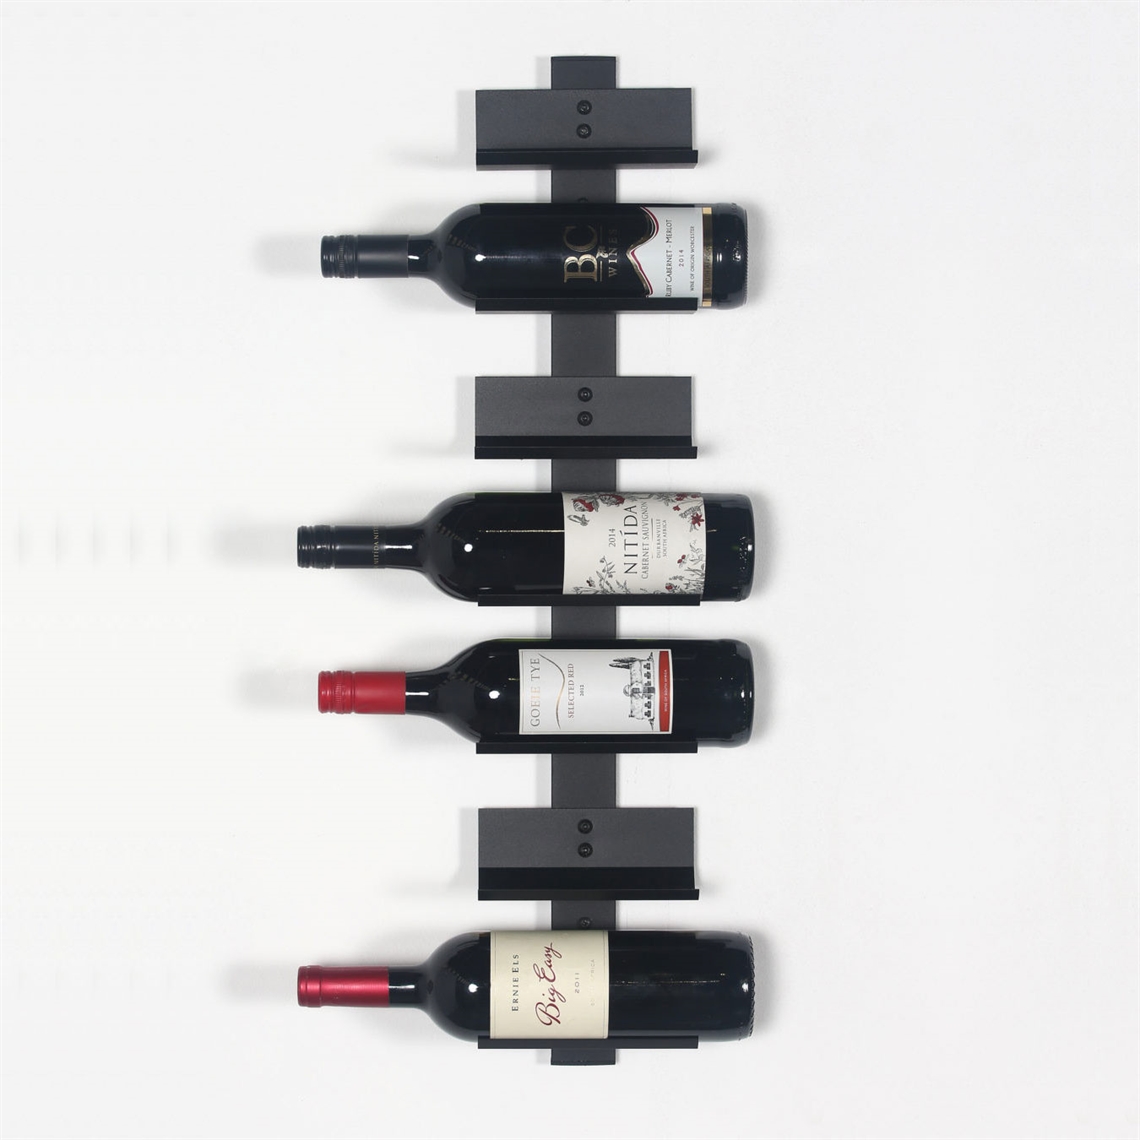 Display Wine Wall Mounted 7 Bottle Cradle & Spine - Black | The modern ...